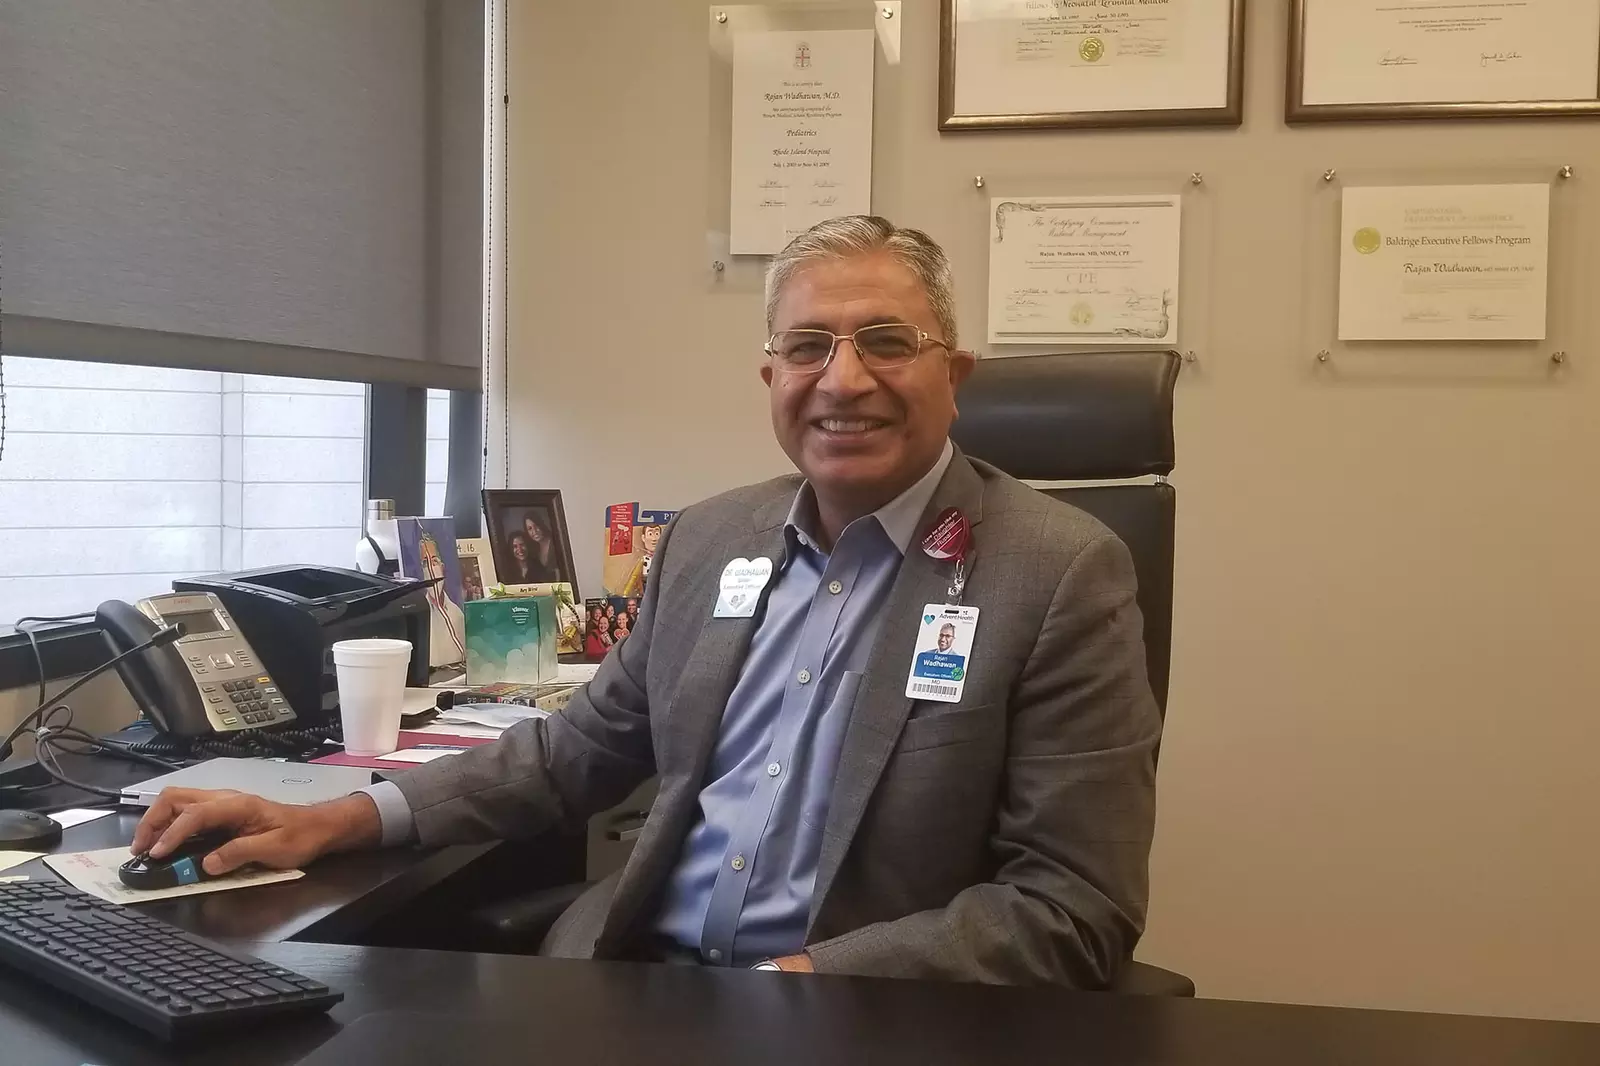 Rajan Wadhawan, M.D. is a neonatologist and senior executive officer of AdventHealth for Children and AdventHealth for Wome